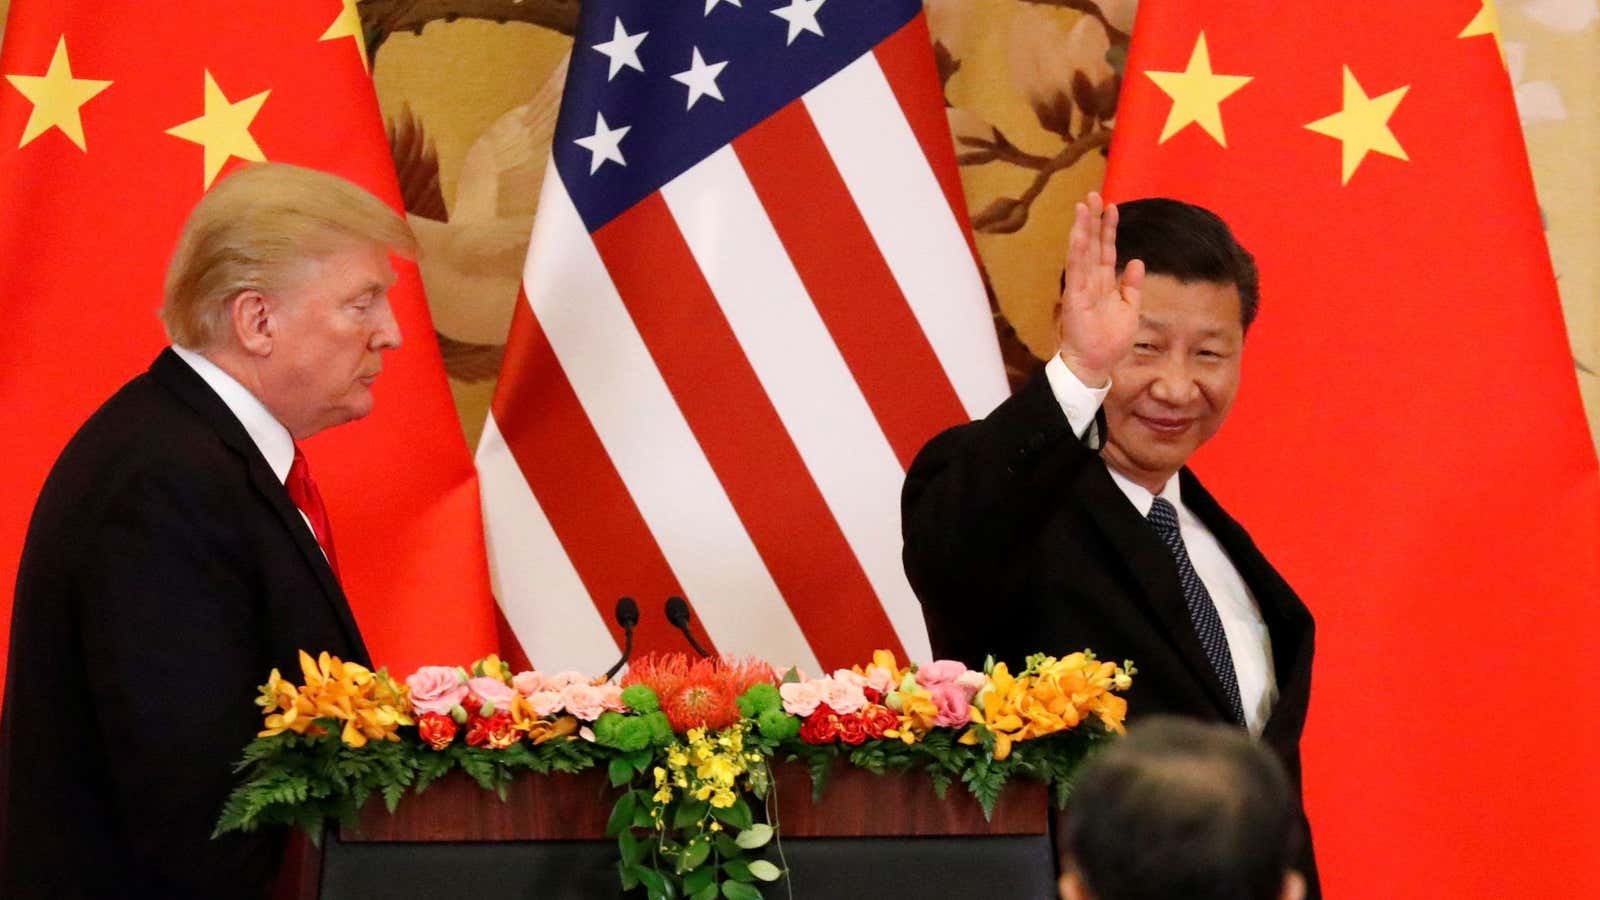 American consumers may be caught in the middle of the US-Chinese trade war.